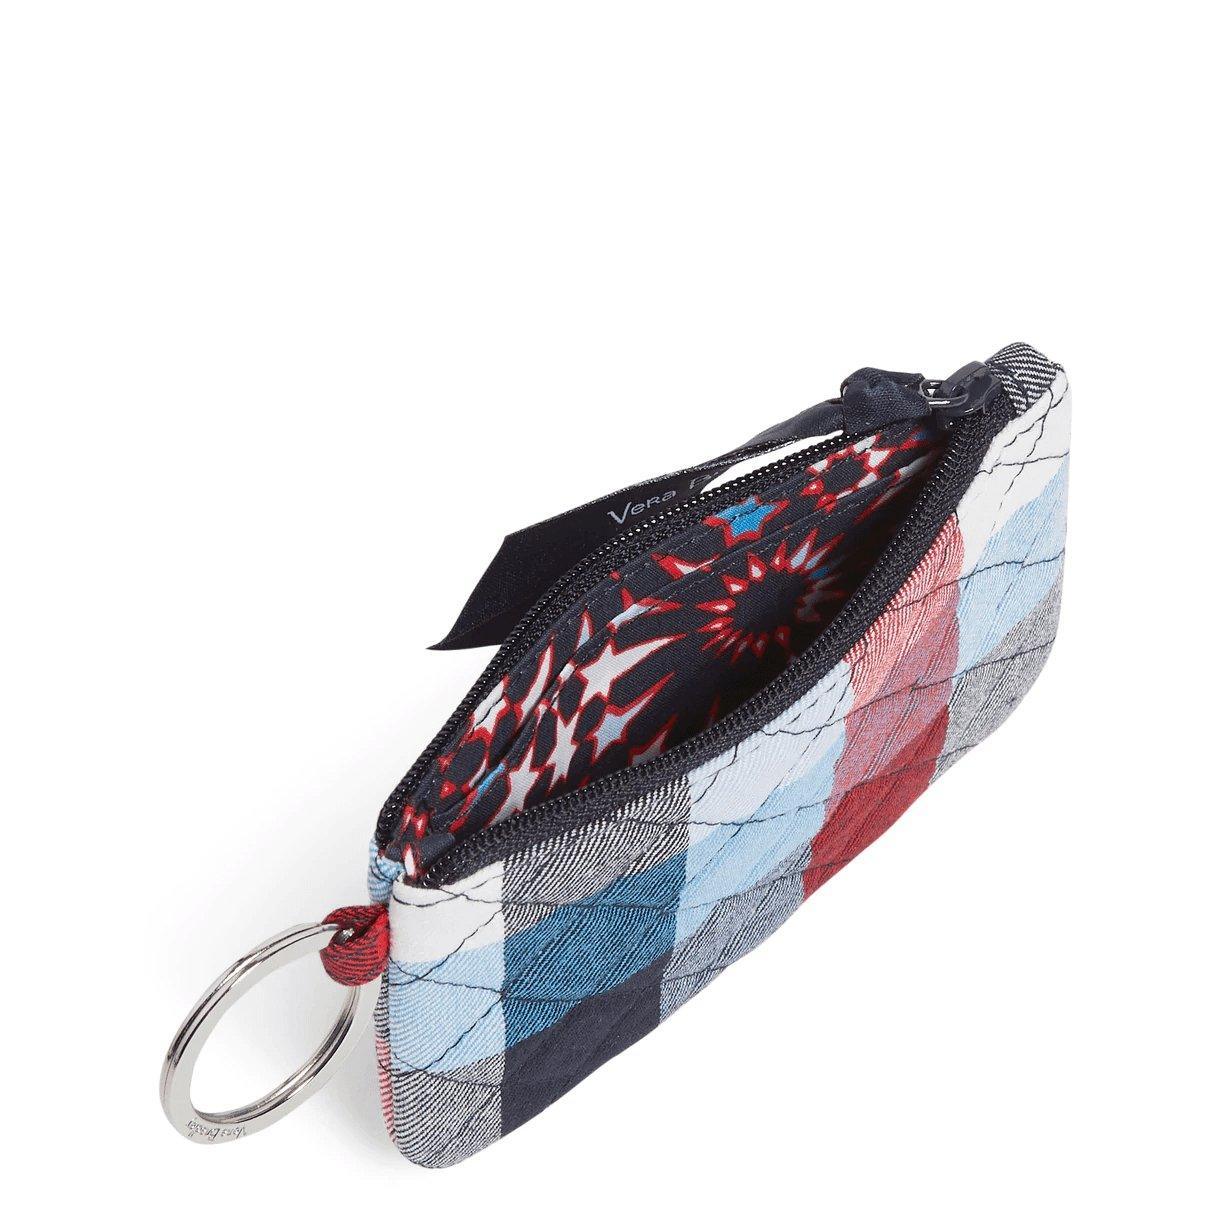 Patriotic Plaid Zip Id Case - Sunshine and Grace Gifts